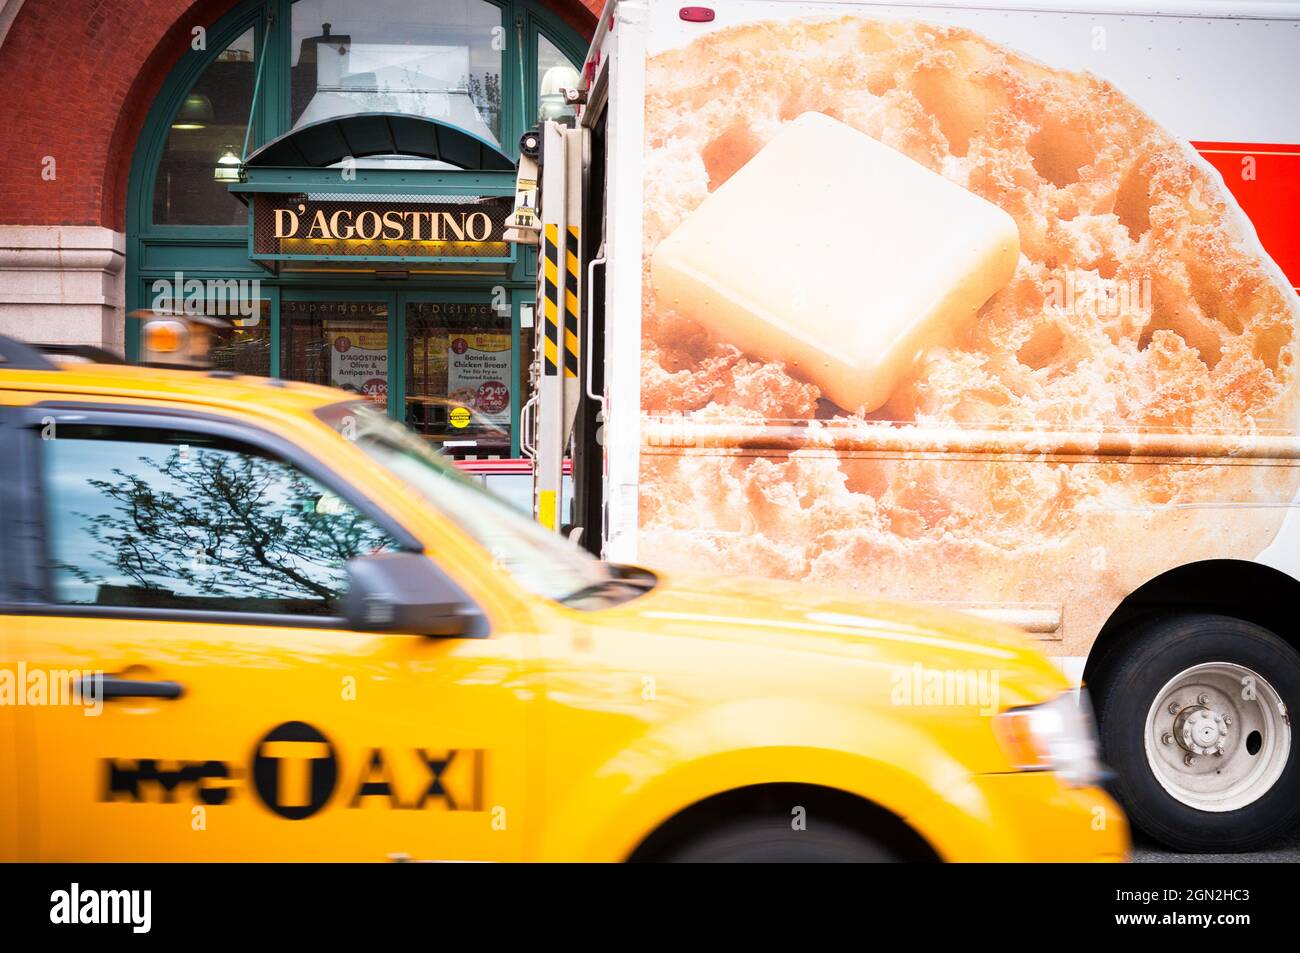 UNITED STATES, NEW YORK, MANHATTAN, COMMERCE AGOSTINO WITH A DELIVERY TRUCK AND A YELLOW CAB IN THE FOREGROUND Stock Photo